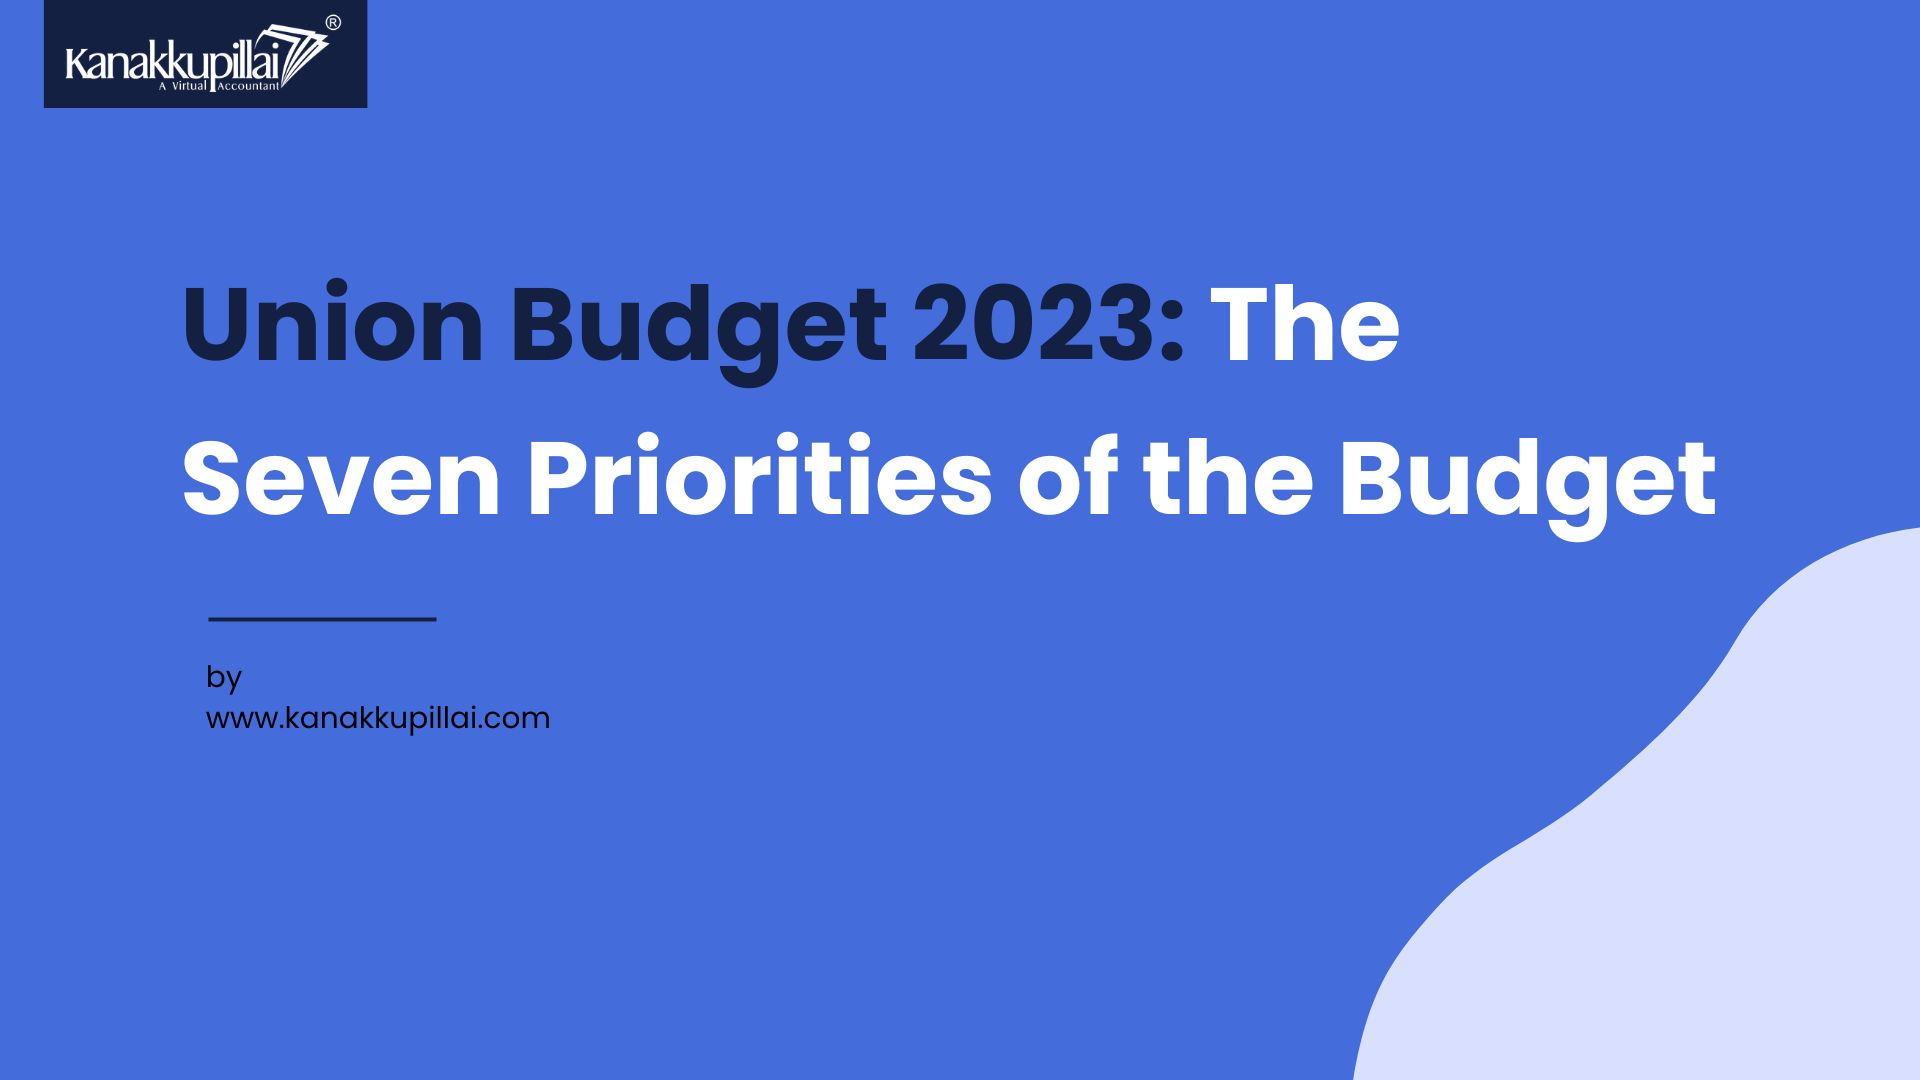 UNION BUDGET 2023: THE SEVEN PRIORITIES OF BUDGET